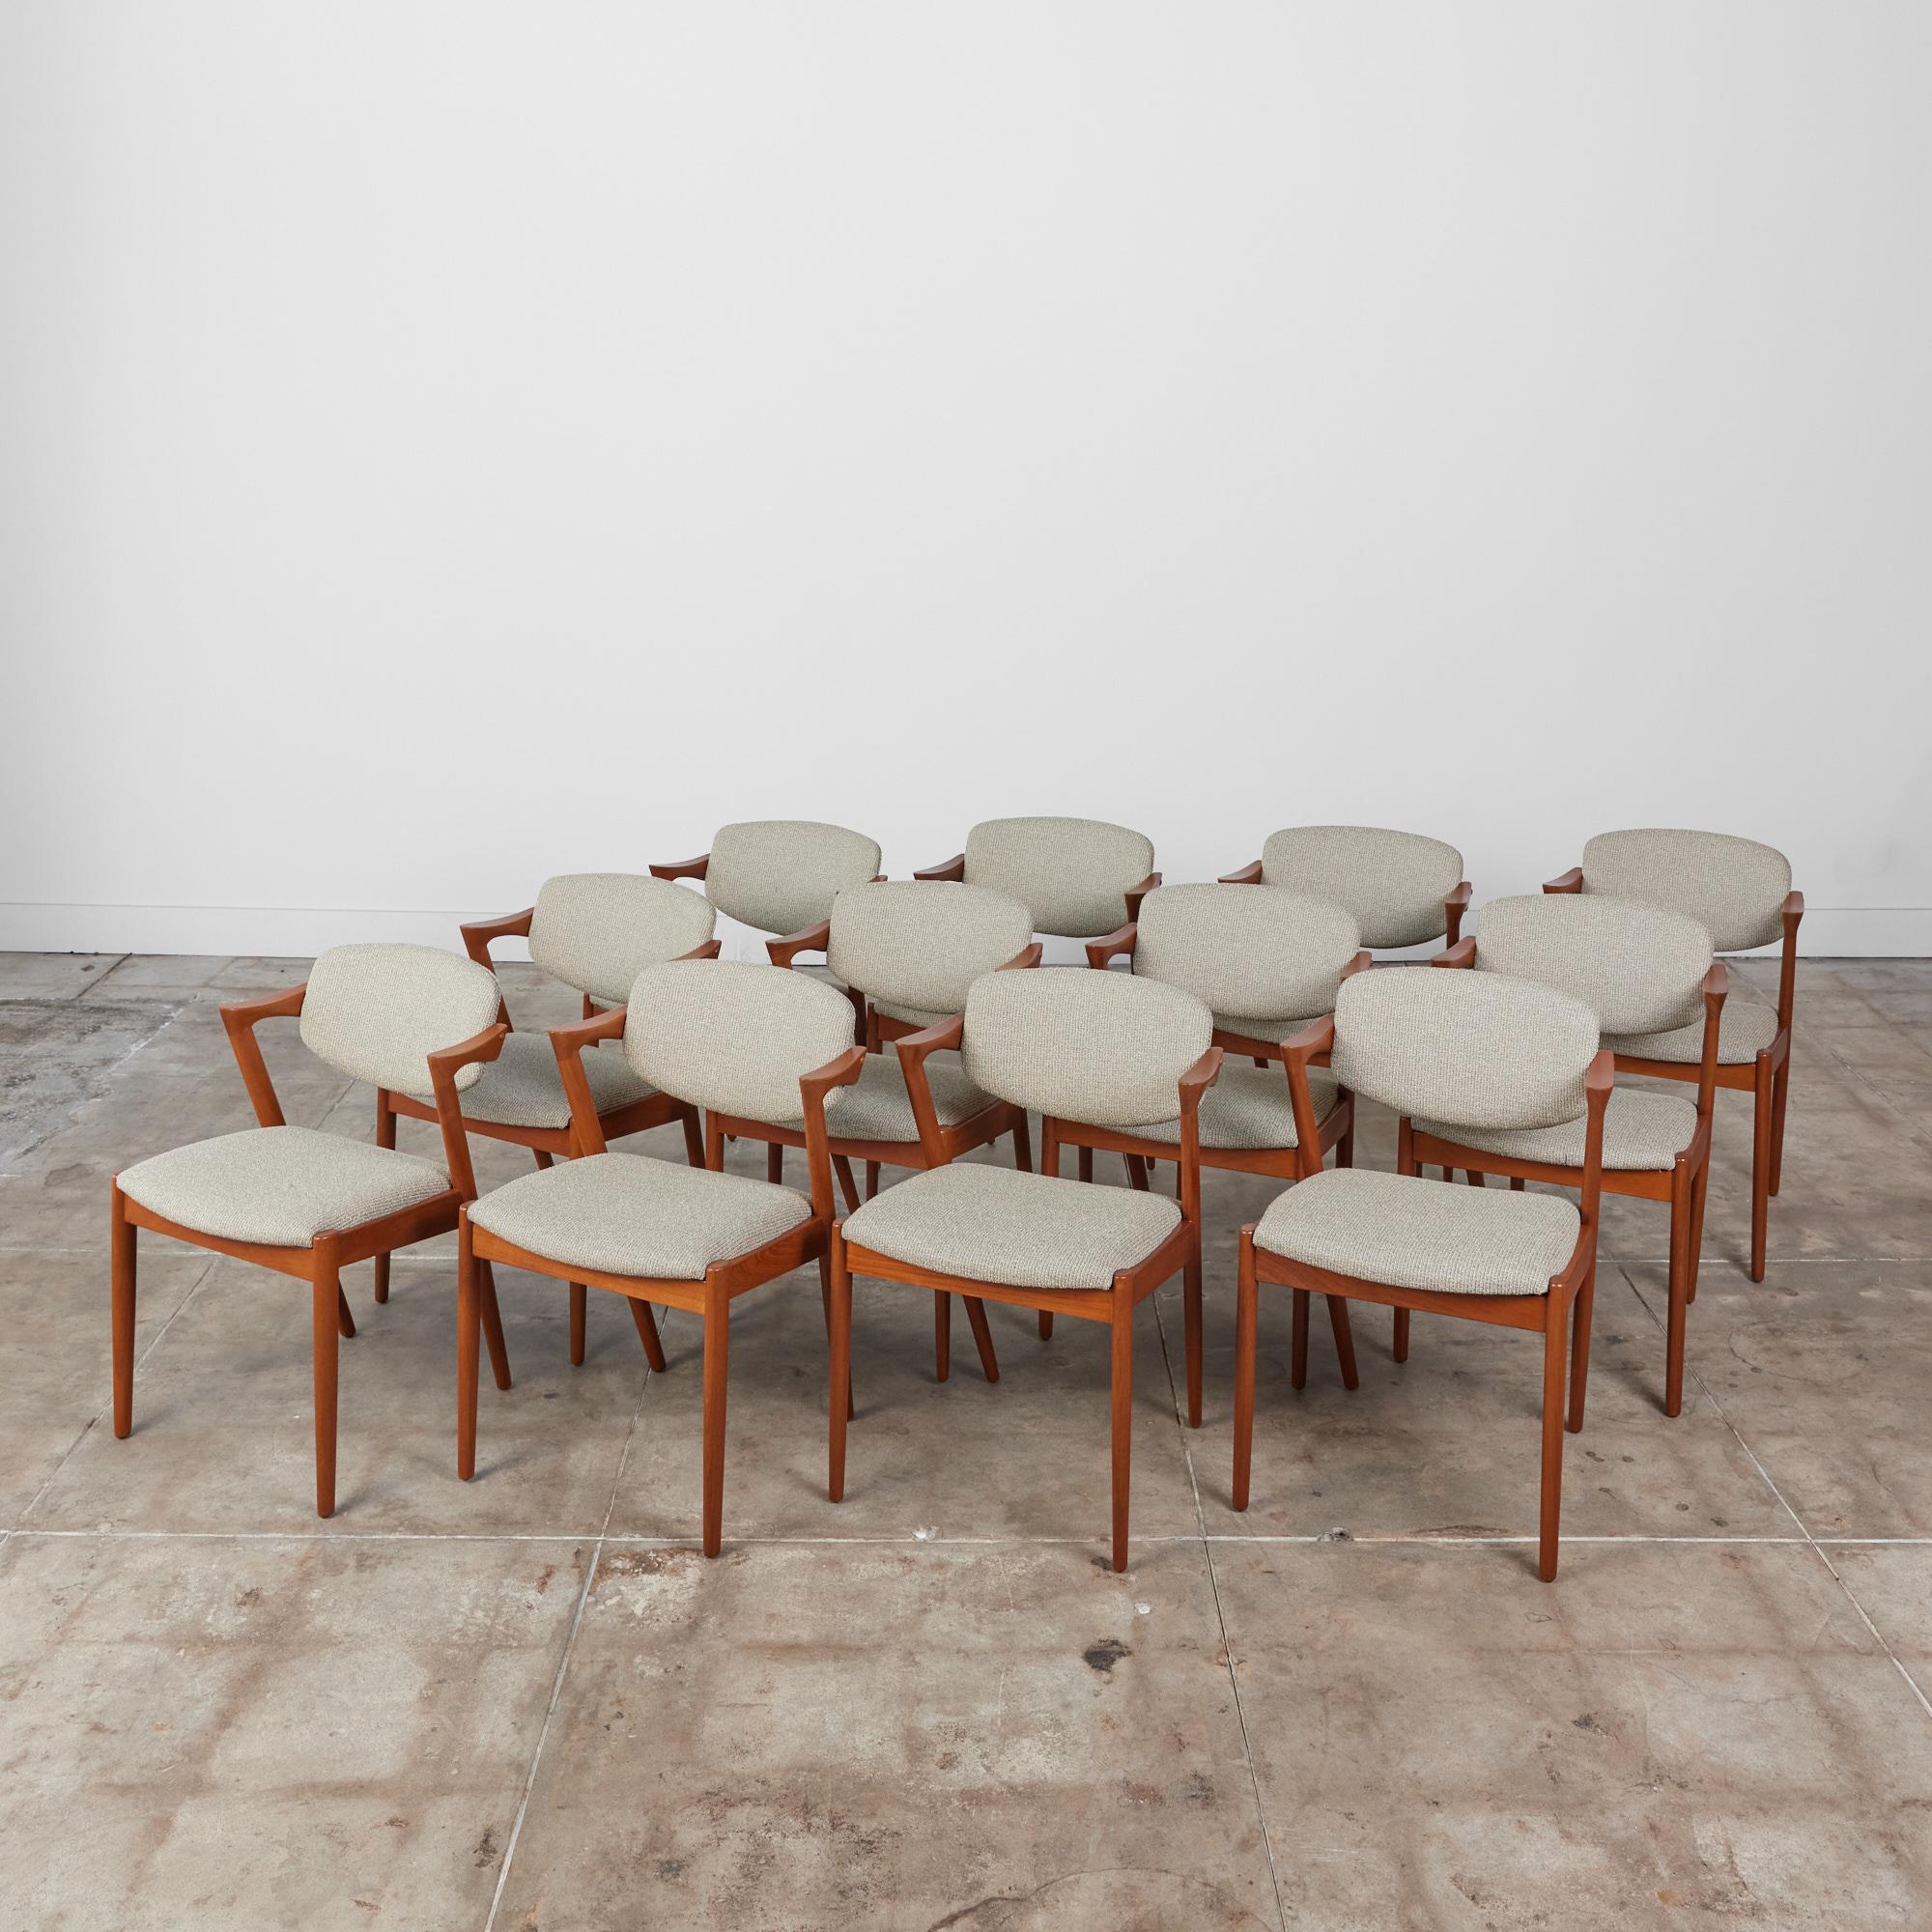 Set of twelve Danish modern teak dining chairs by Kai Kristiansen for Schou Andersen, with a sculpted frame and sharp lines. The model 42 chair was the first chair with armrests supported by the rear legs of the frame, and was a critical darling